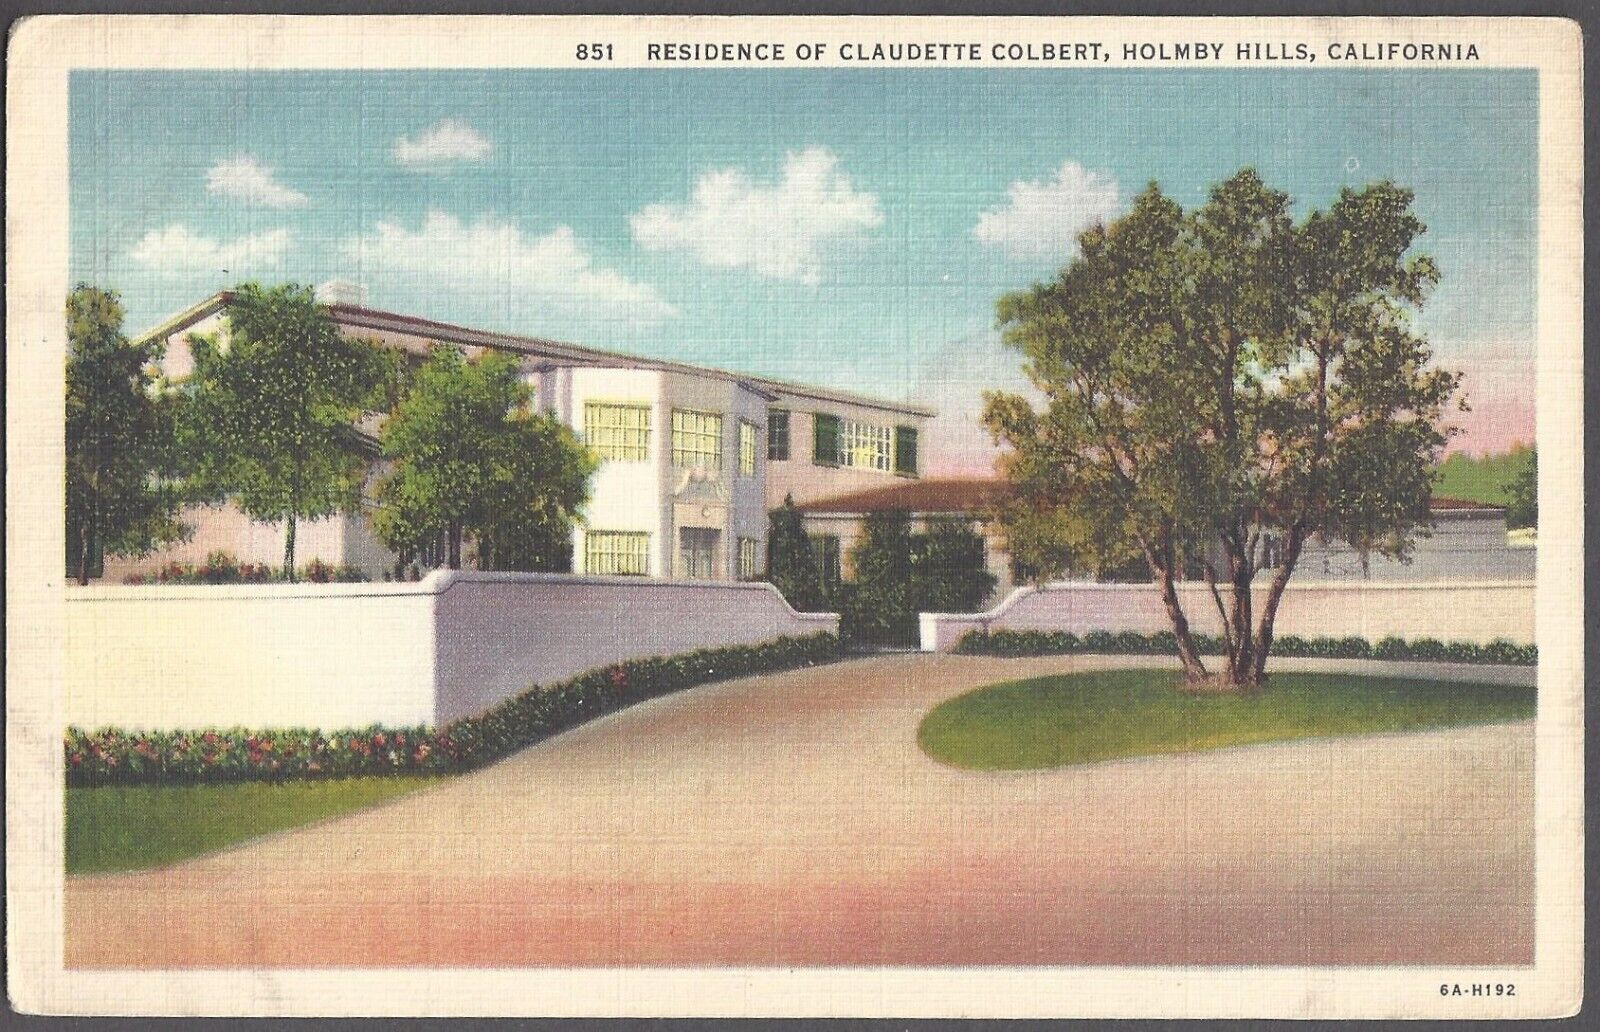 RESIDENCE OF CLAUDETTE COLBERT Postcard Holmby Hills, California